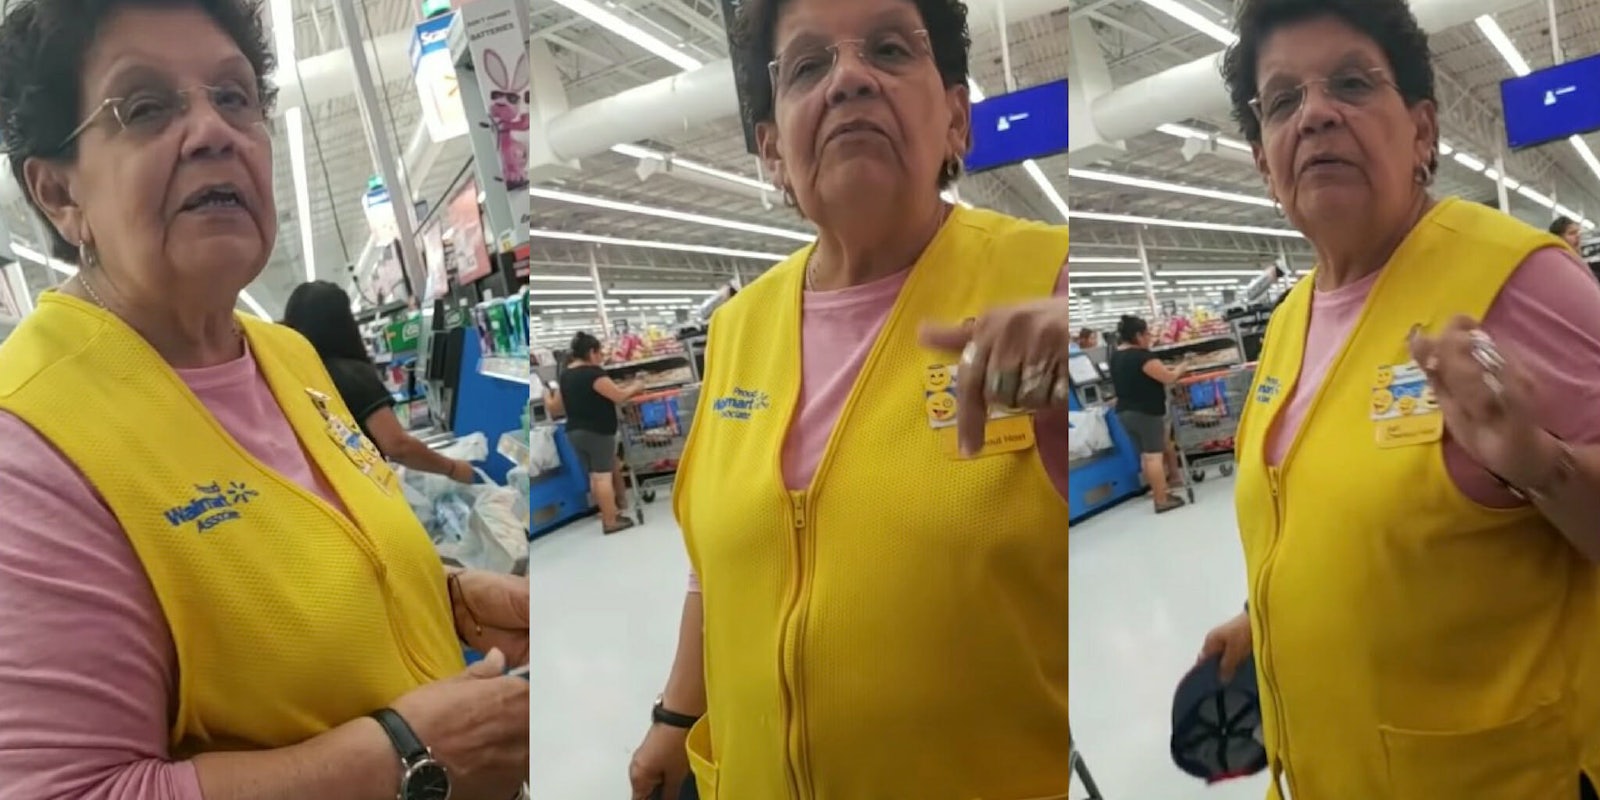 A Walmart employee told a customer to speak English because they were in Texas